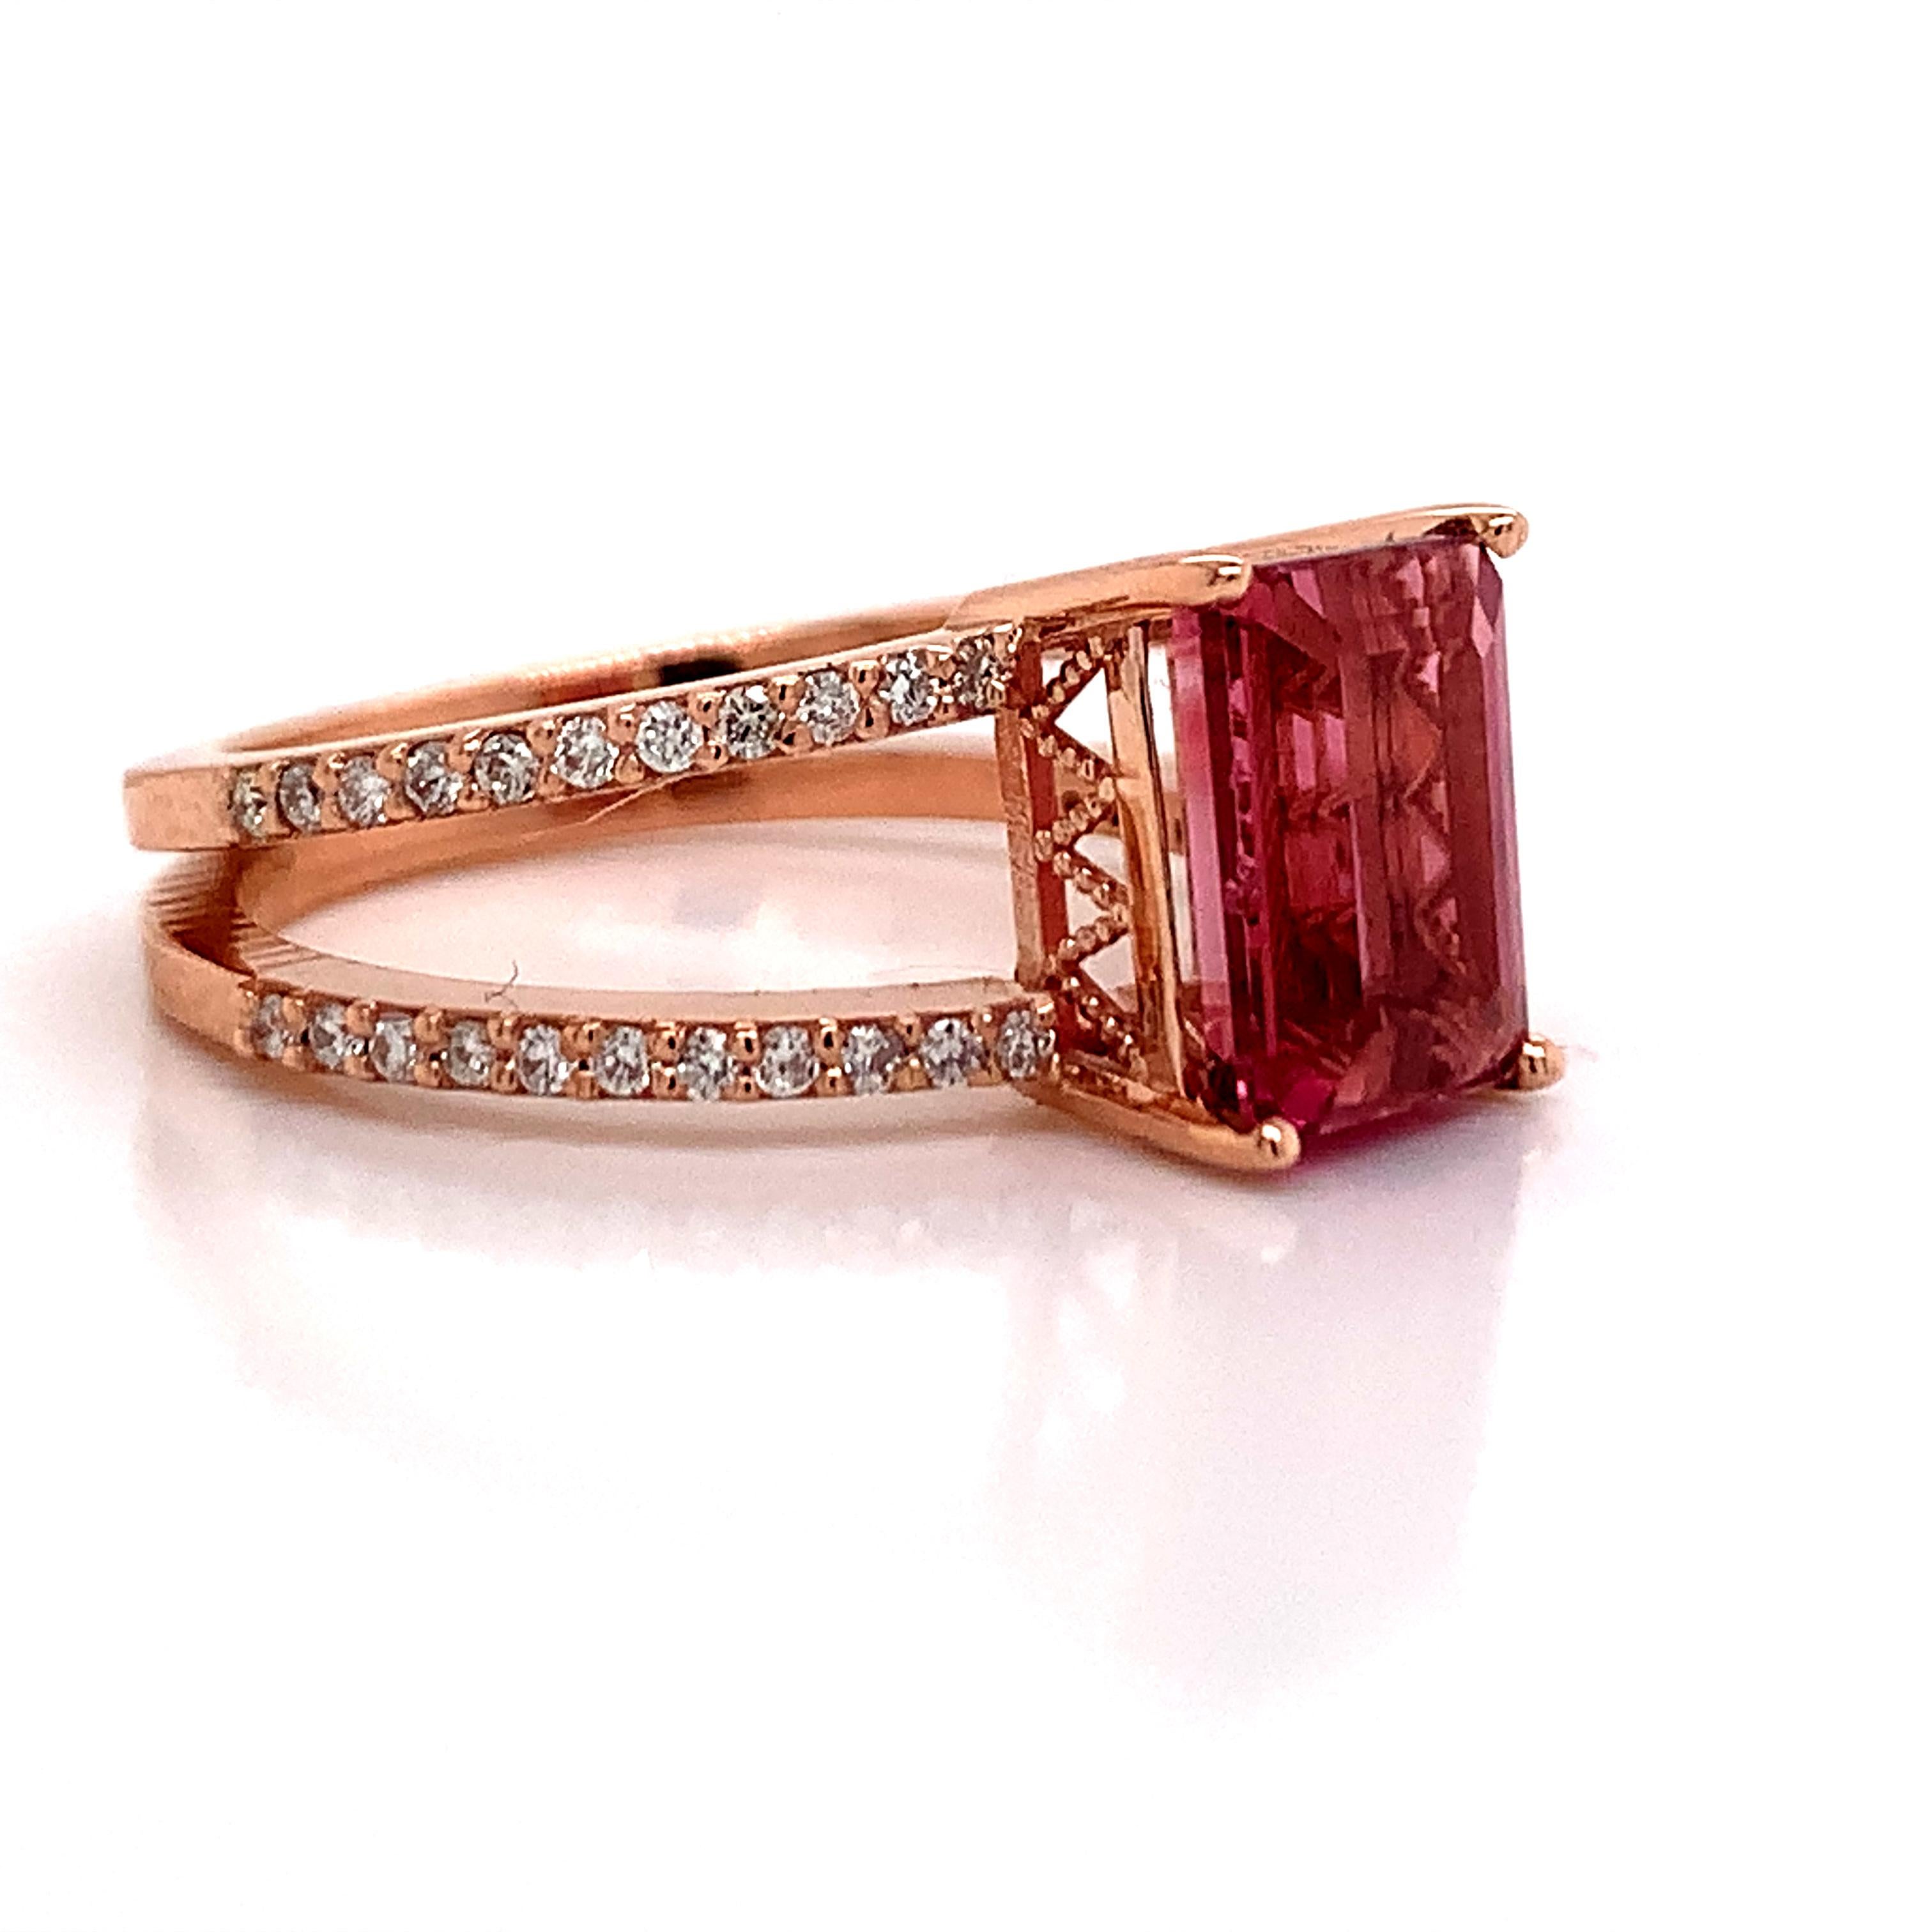 Natural Tourmaline Diamond Ring 14k Rose Gold 2.2 TCW Certified For Sale 6